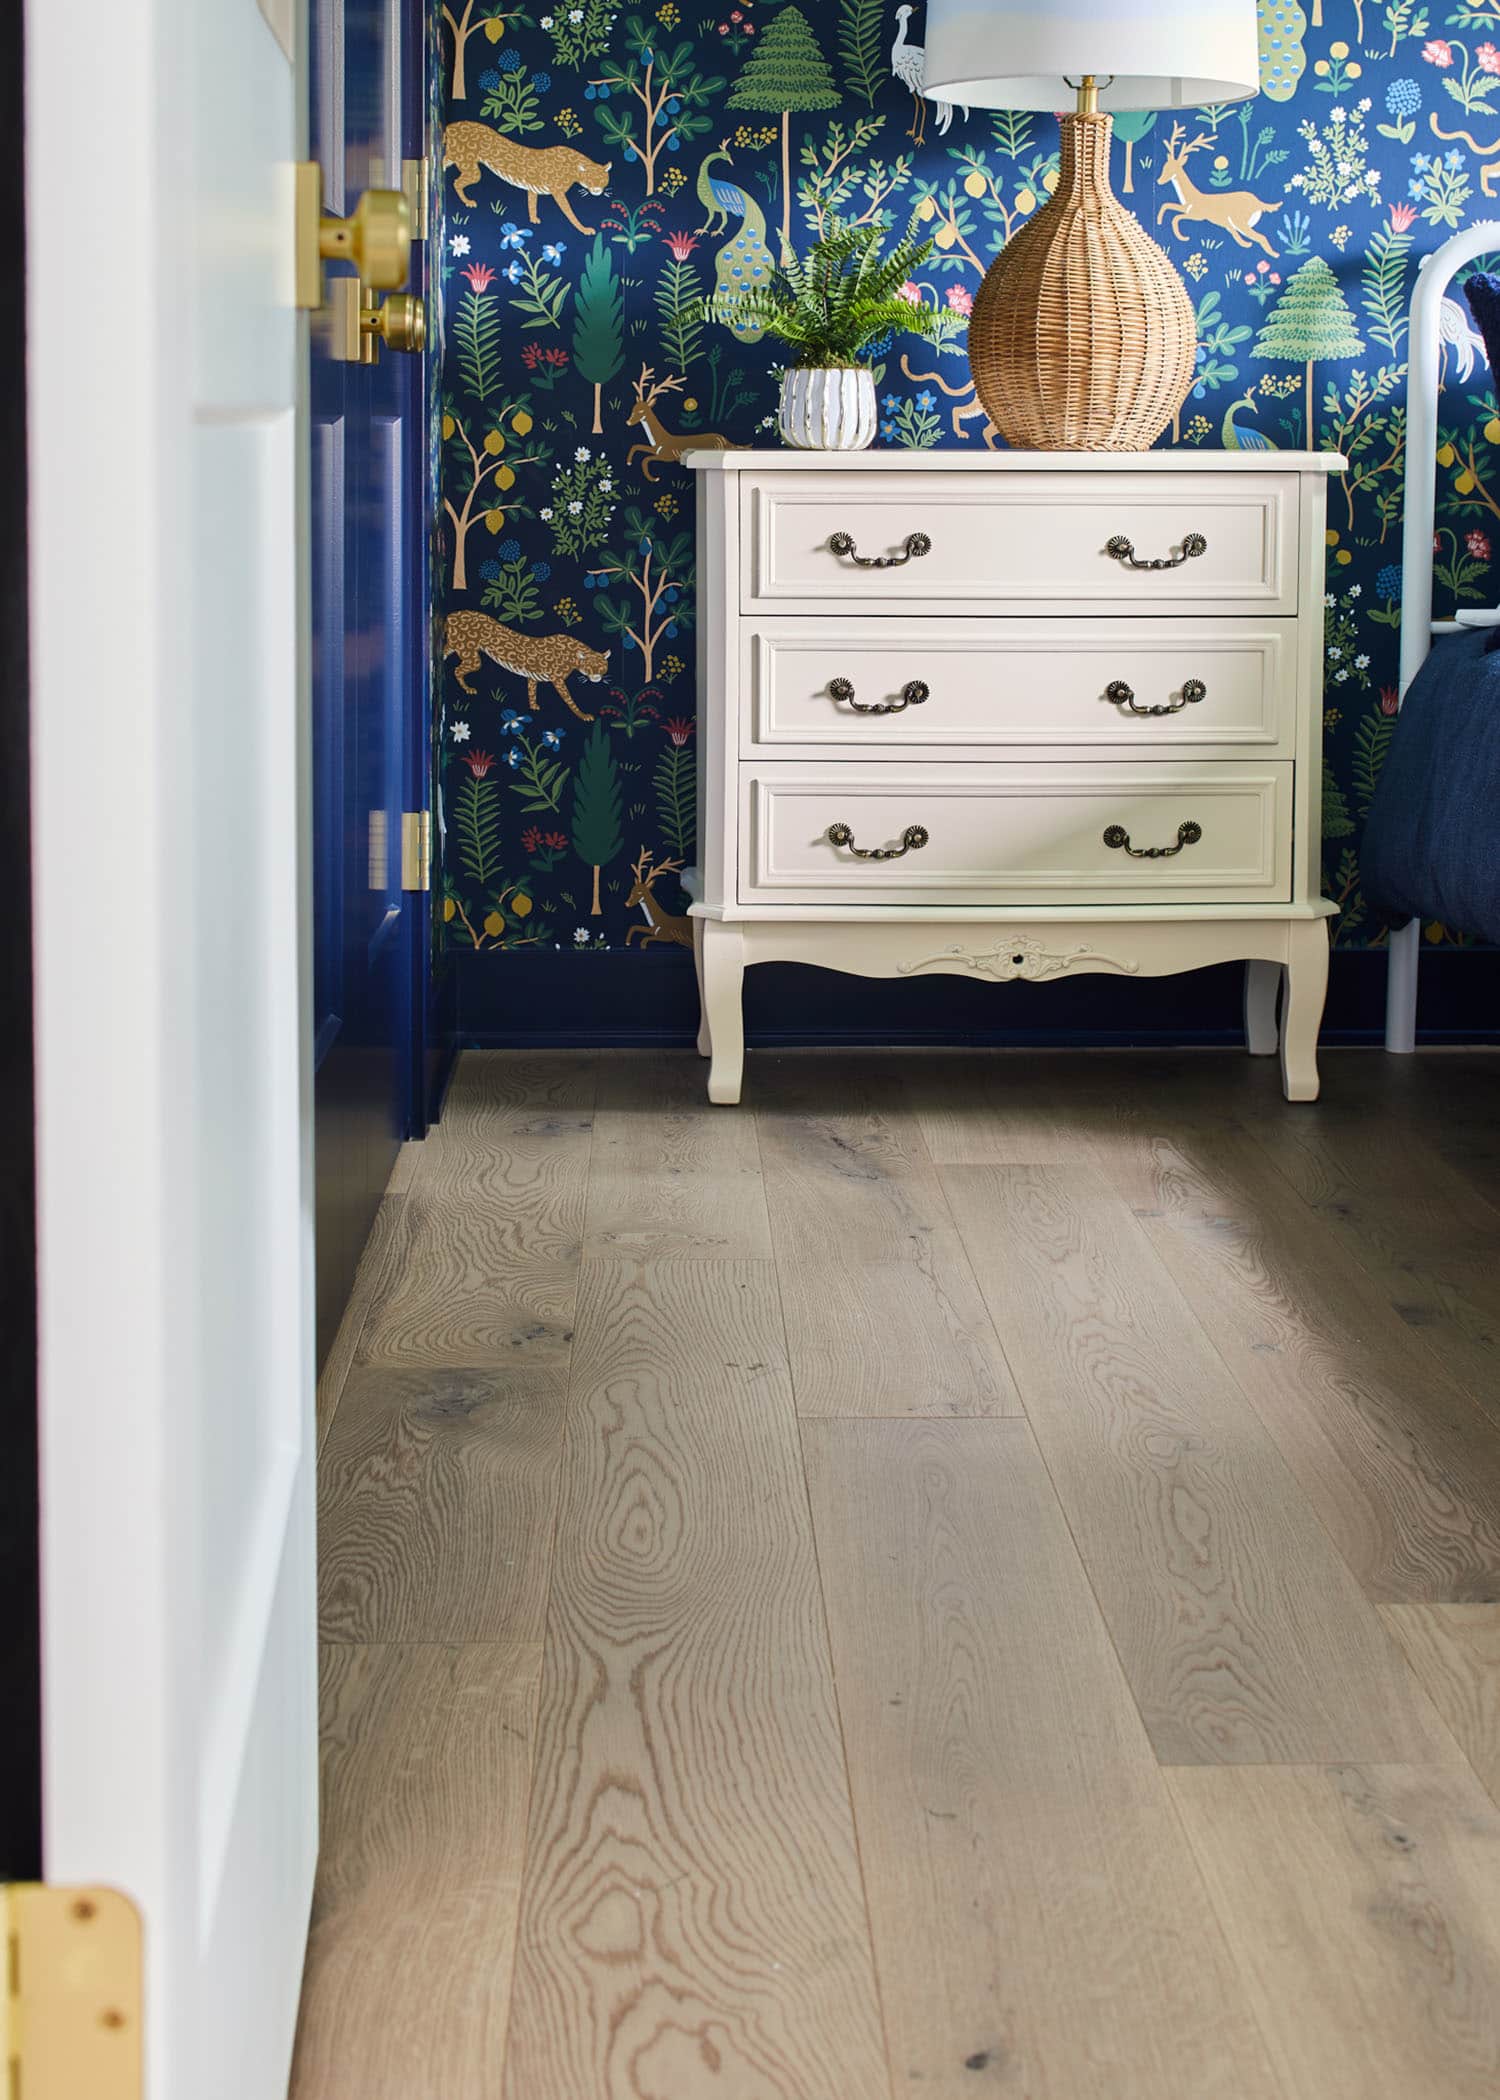 Valberg White Oak Engineered Hardwood Flooring in bedroom of HGTV 2023 Urban Oasis Home with blue animal and floral wallpaper plus cream side table and rattan table lamp